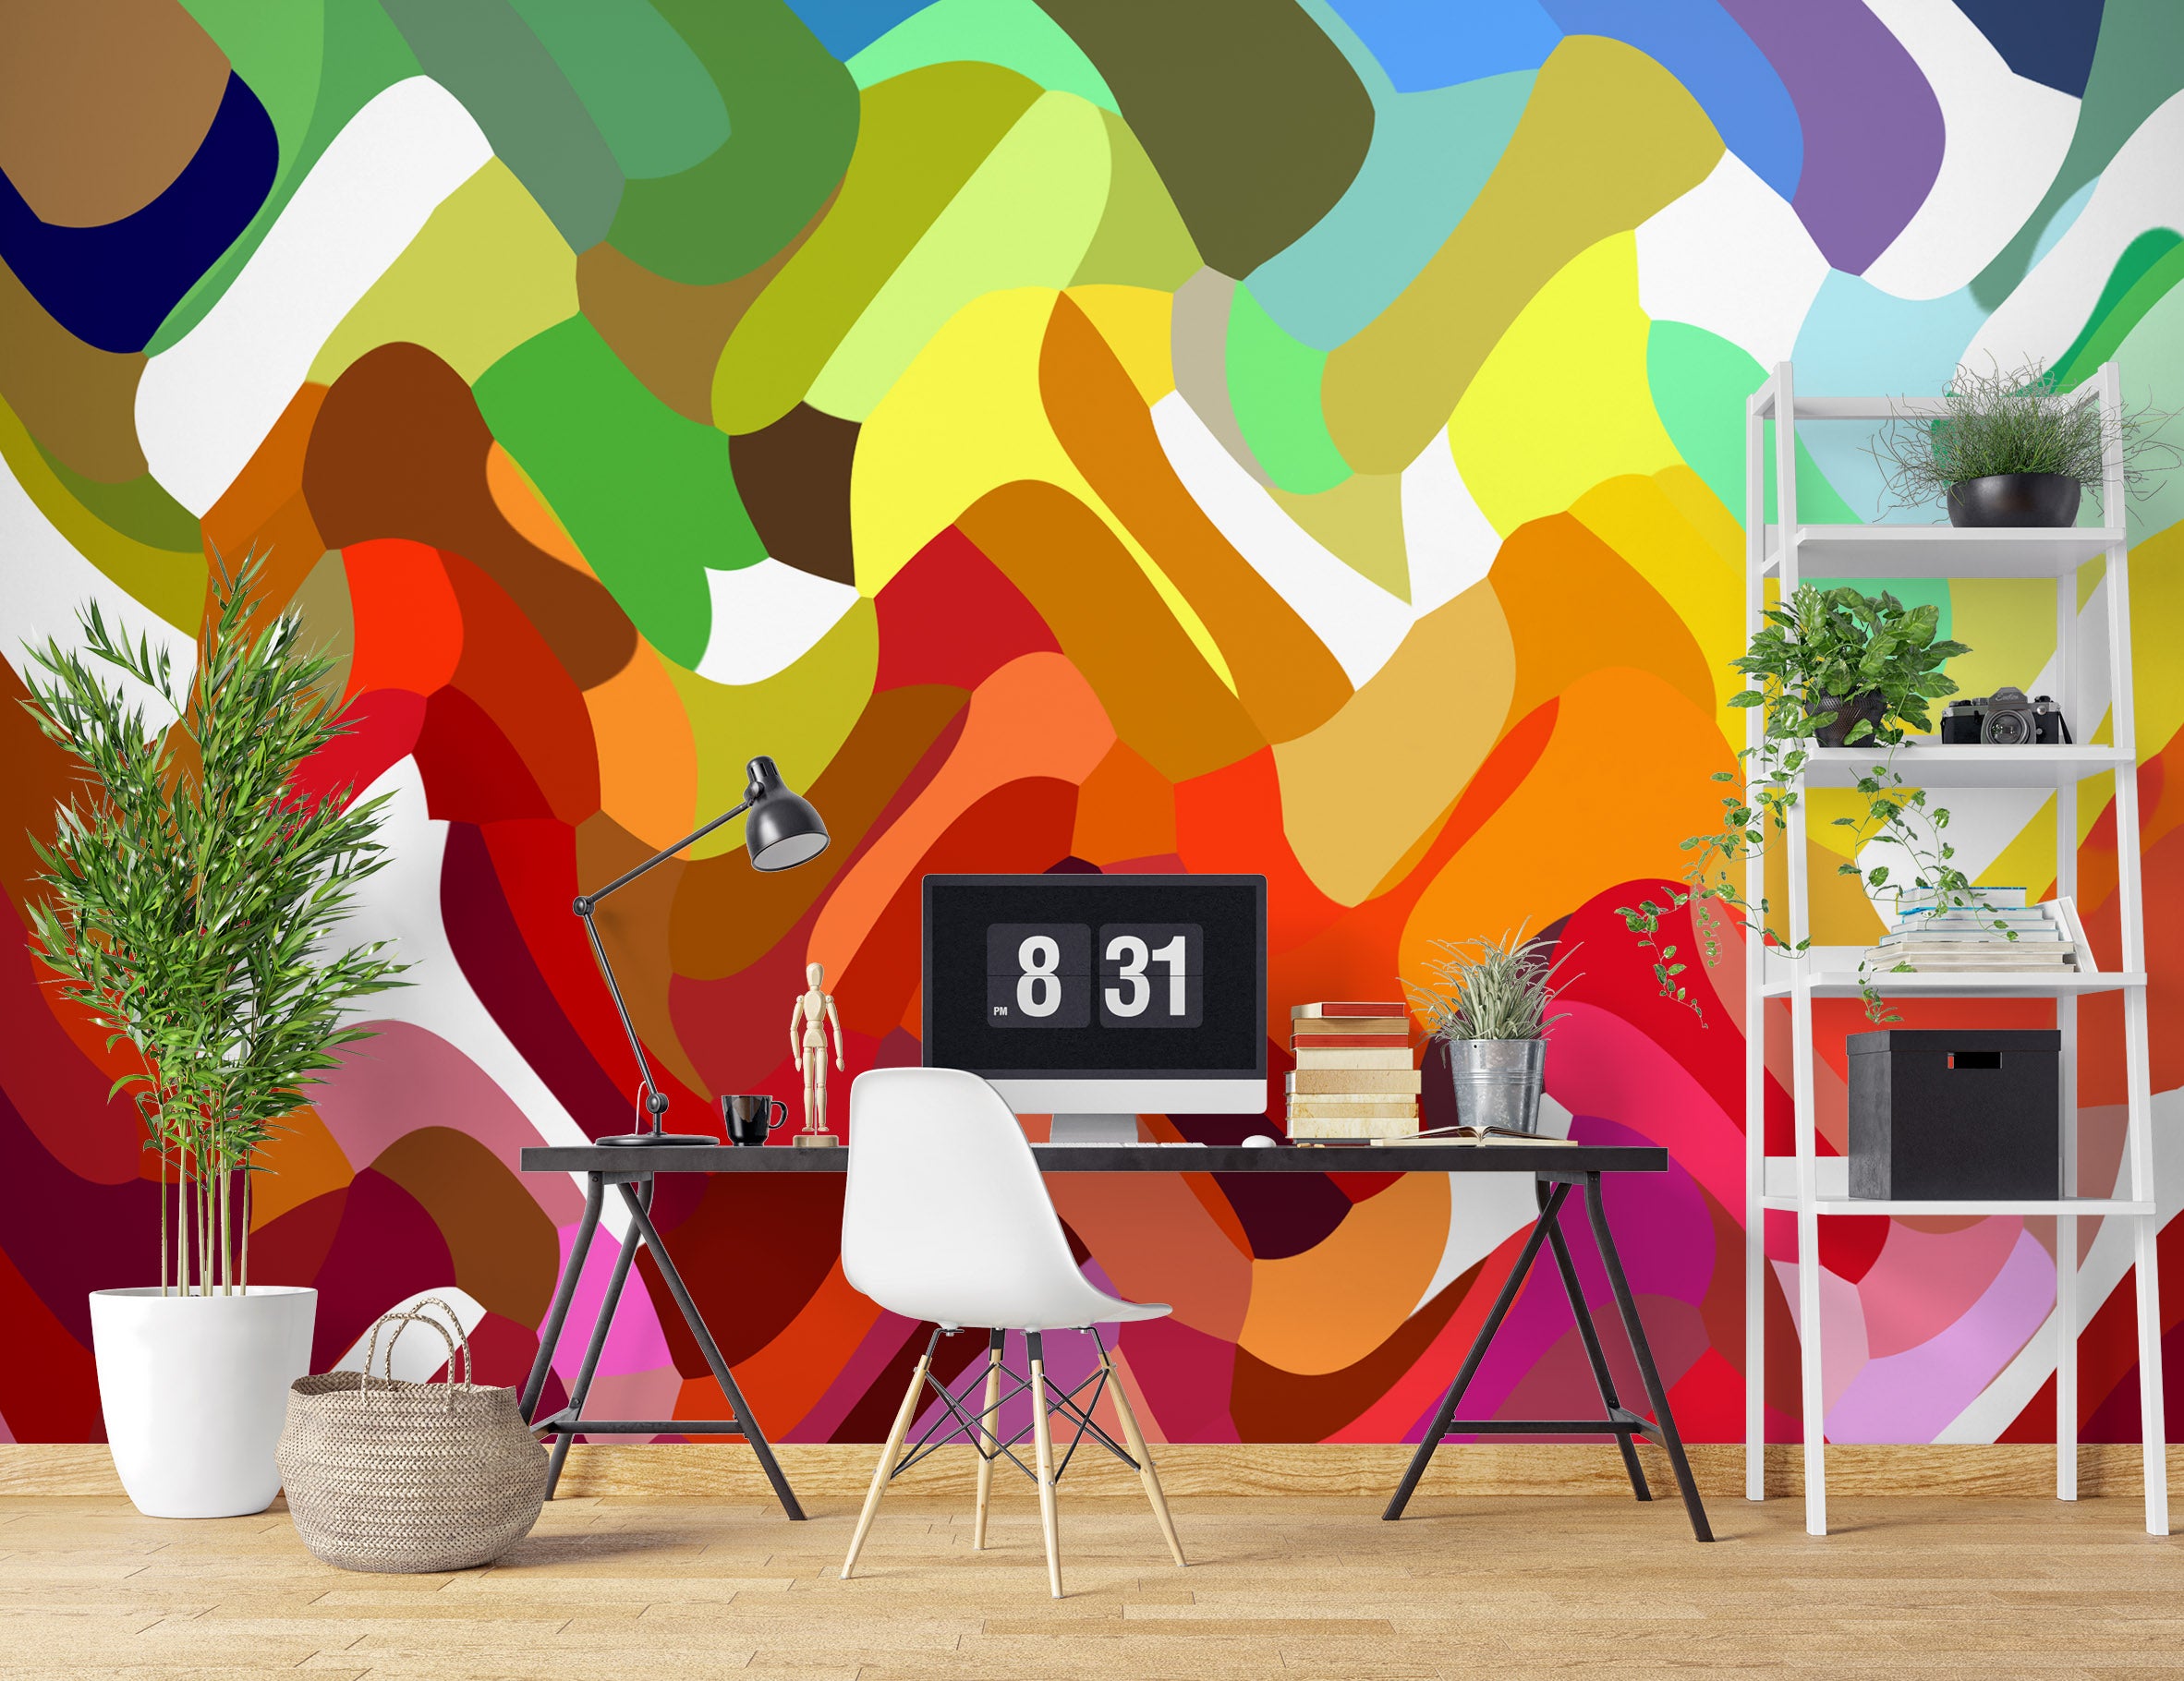 3D Colorful Pattern 19107 Shandra Smith Wall Mural Wall Murals